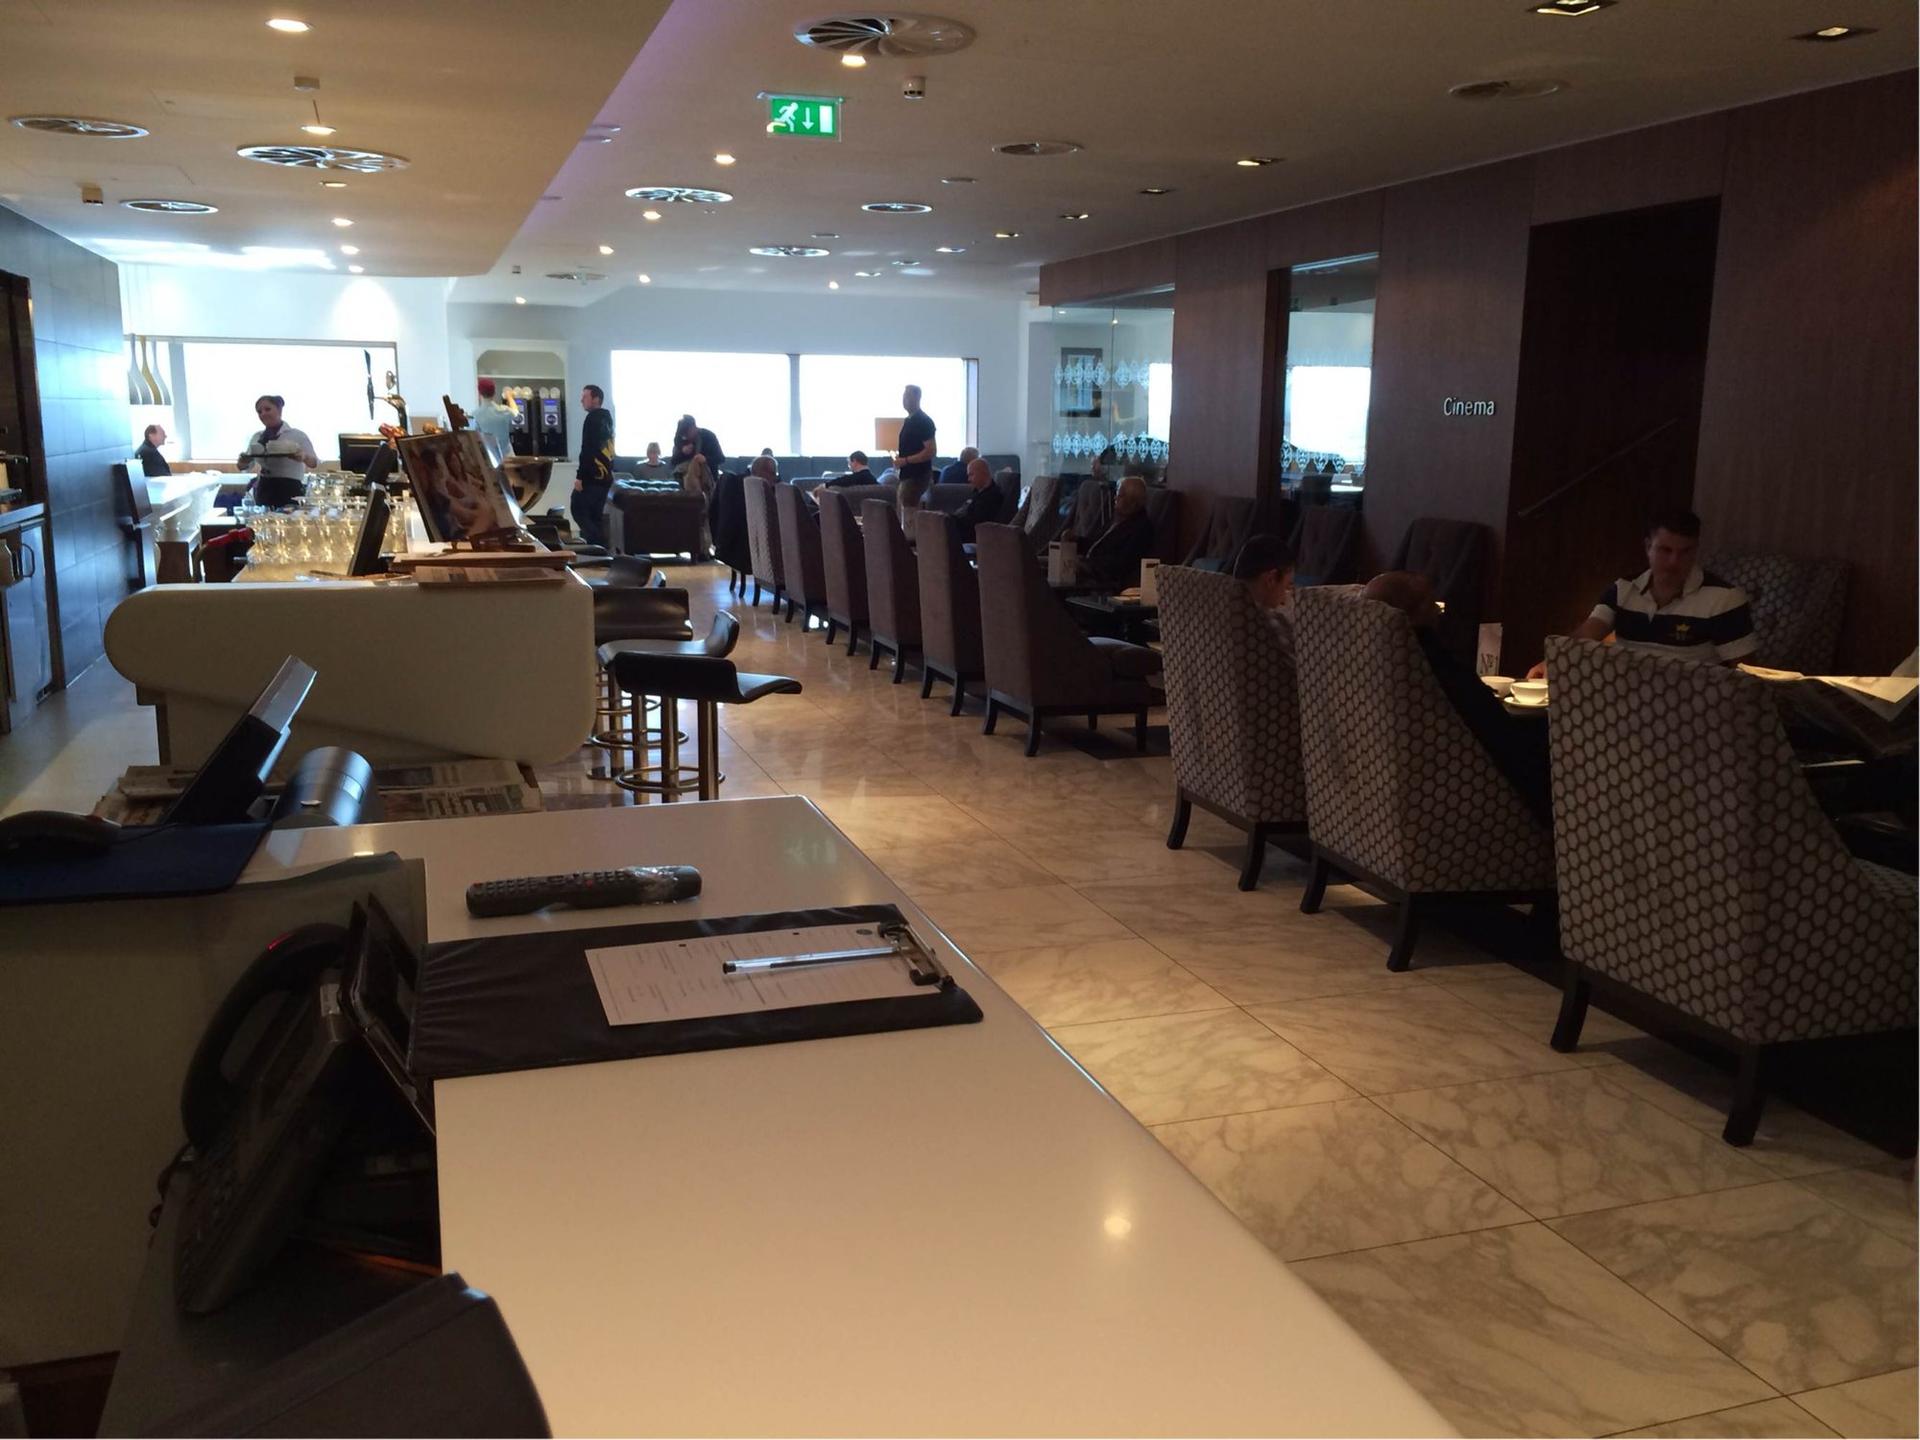 No1 Lounges, Heathrow Terminal 3 image 22 of 33